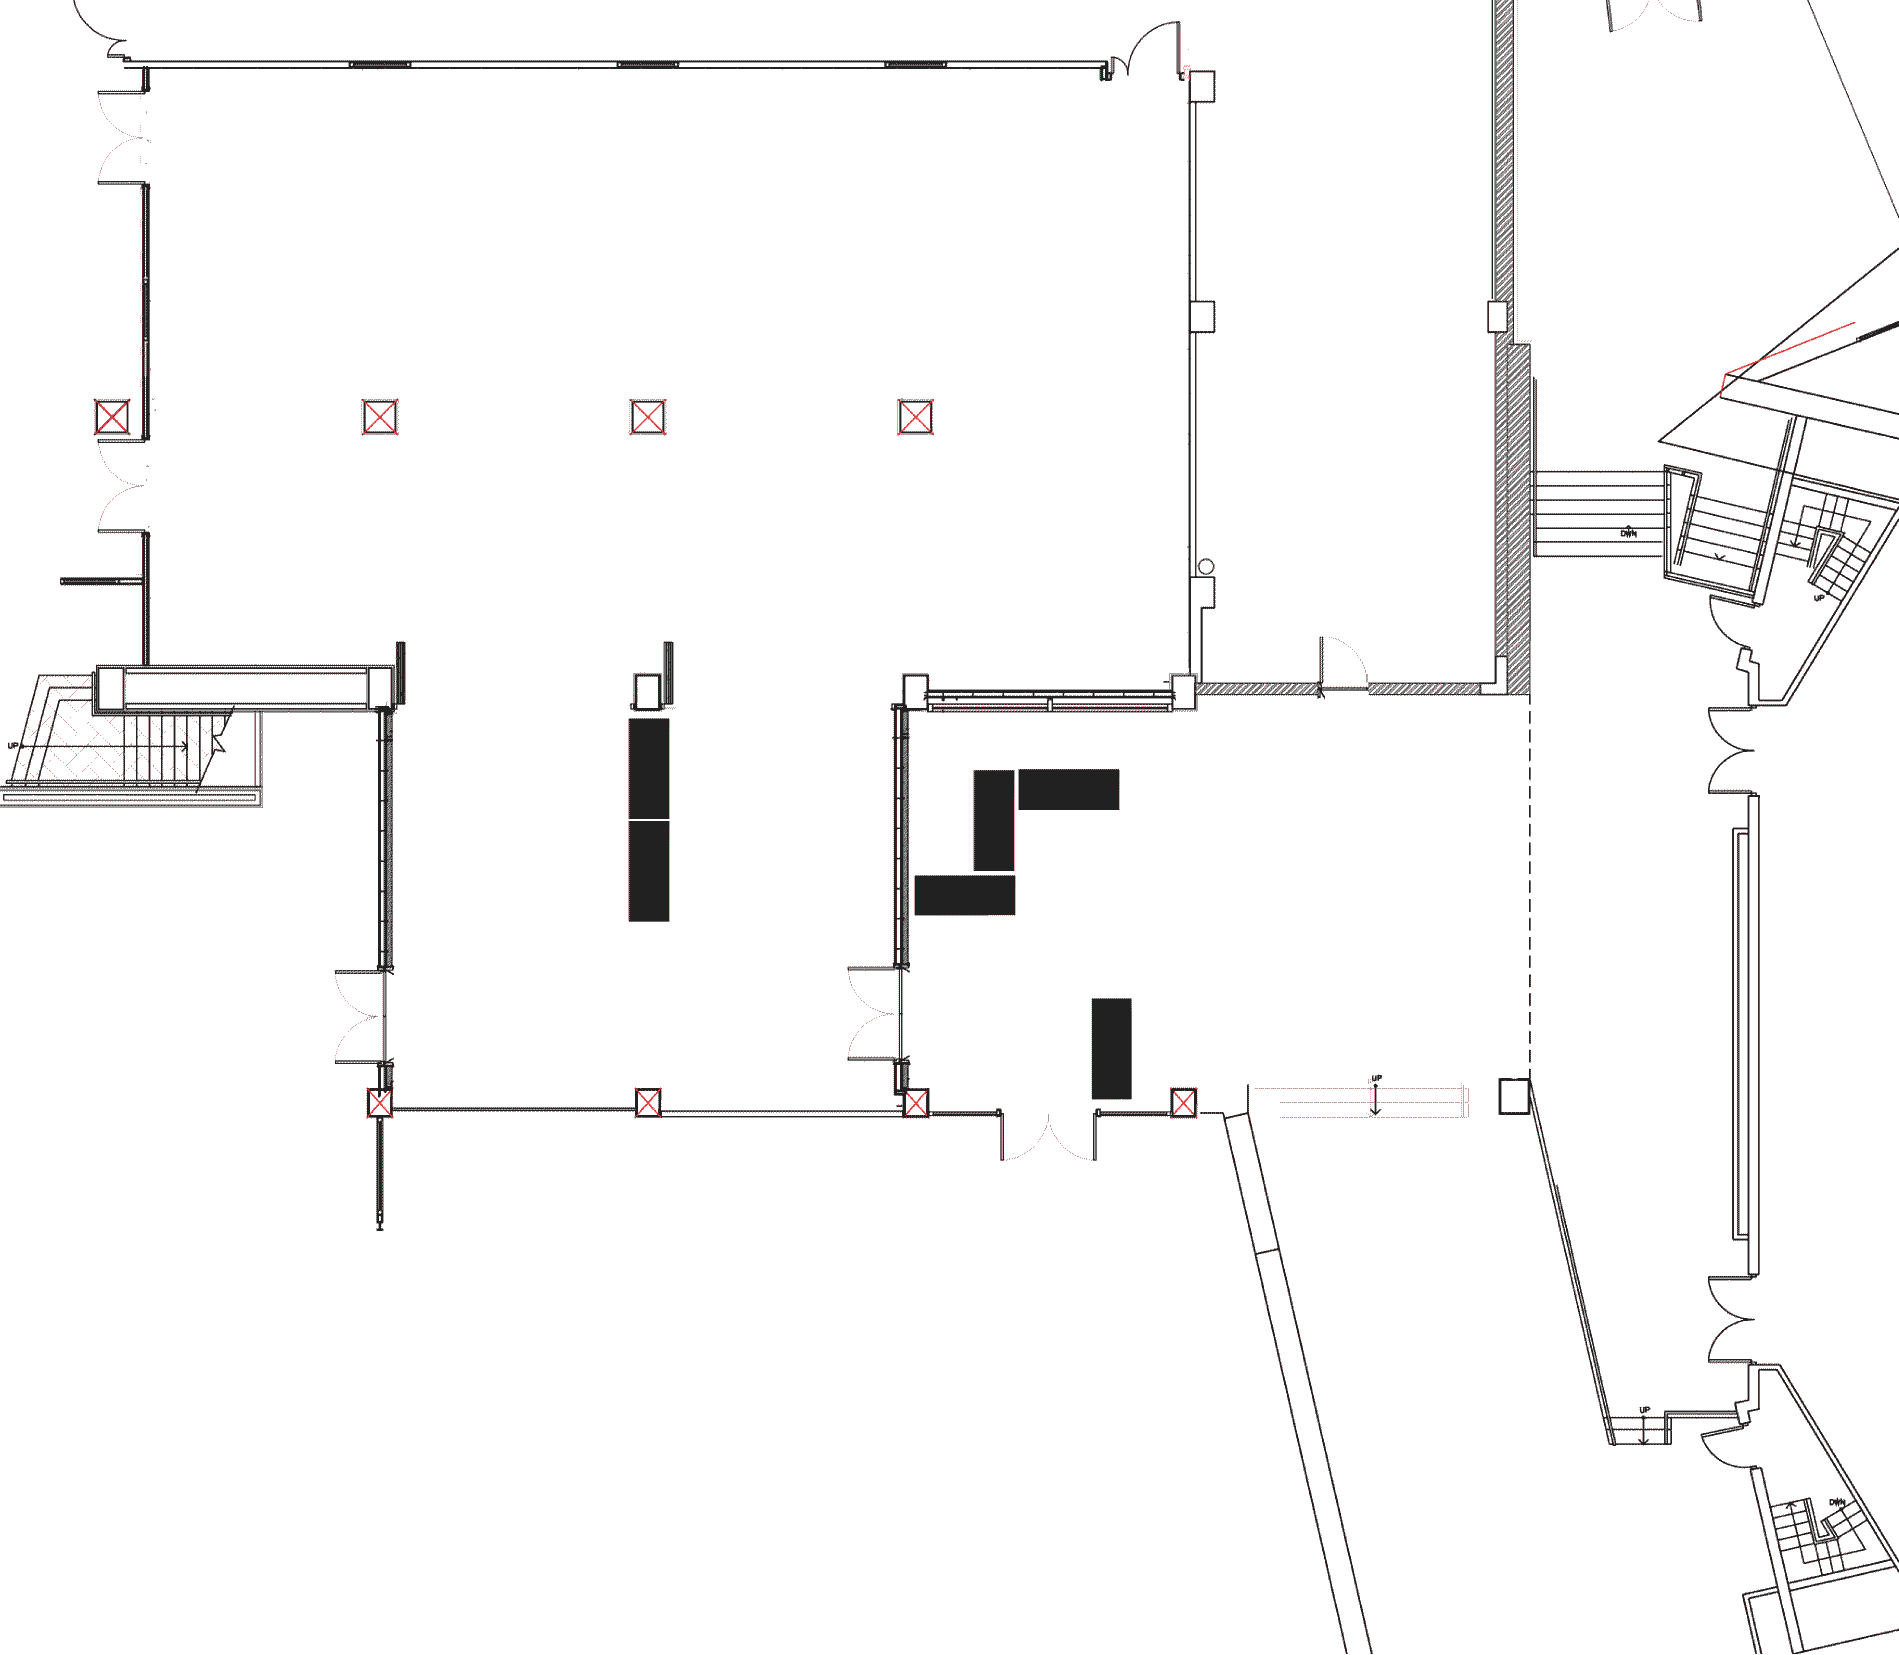 Ground floor plan of Margaret McMillan Tower and Pictureville